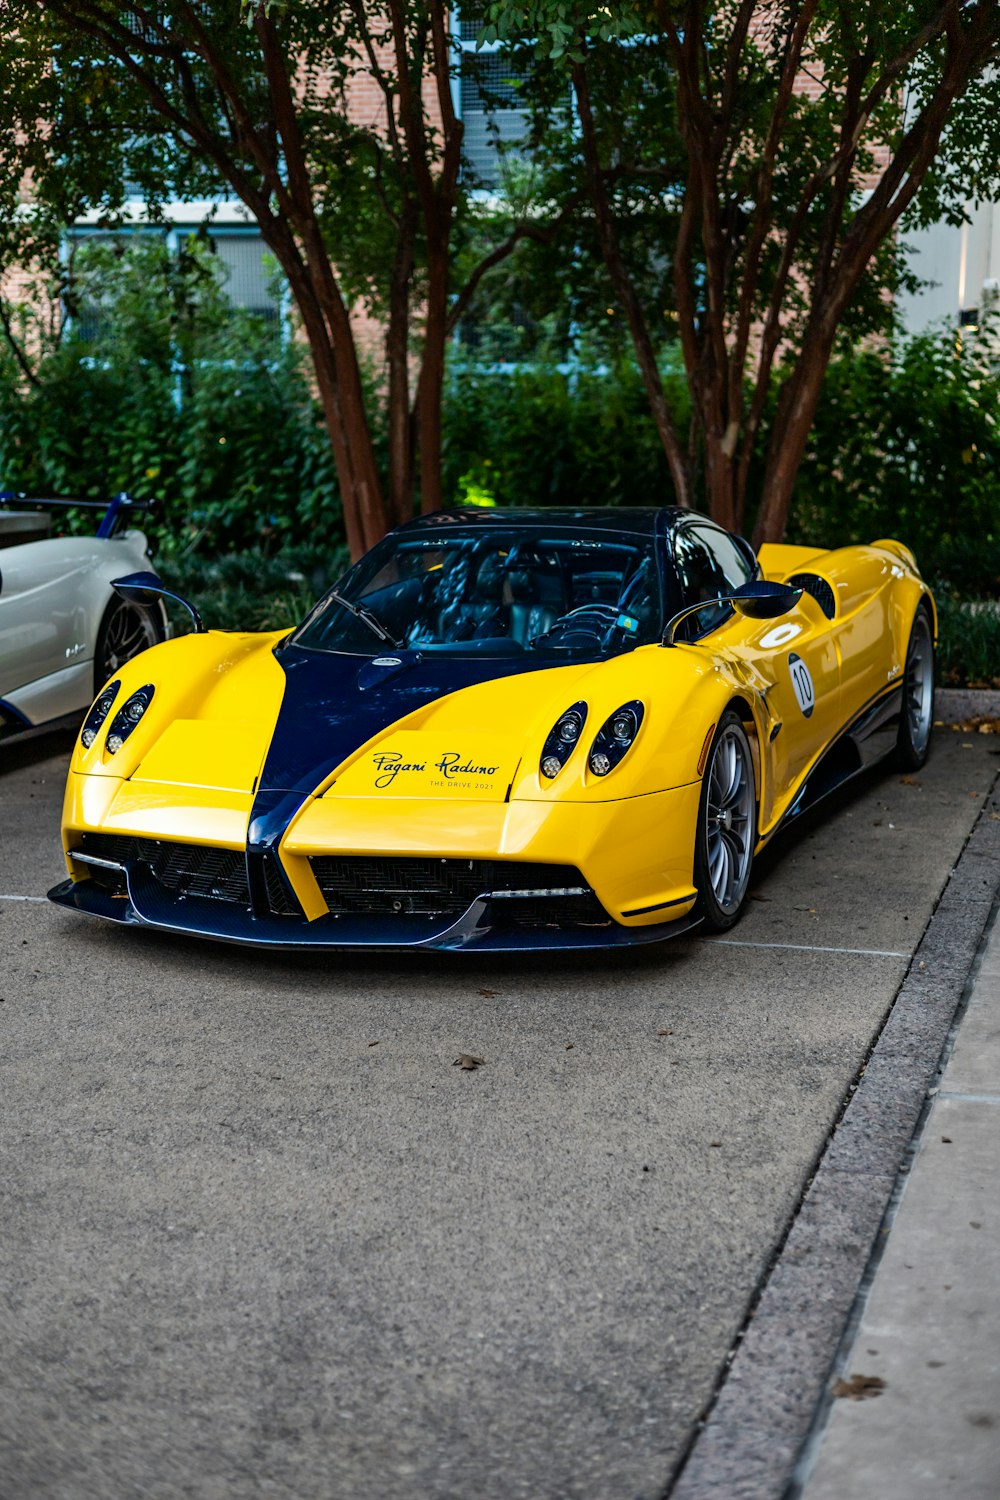 a yellow and blue sports car parked in a parking lot